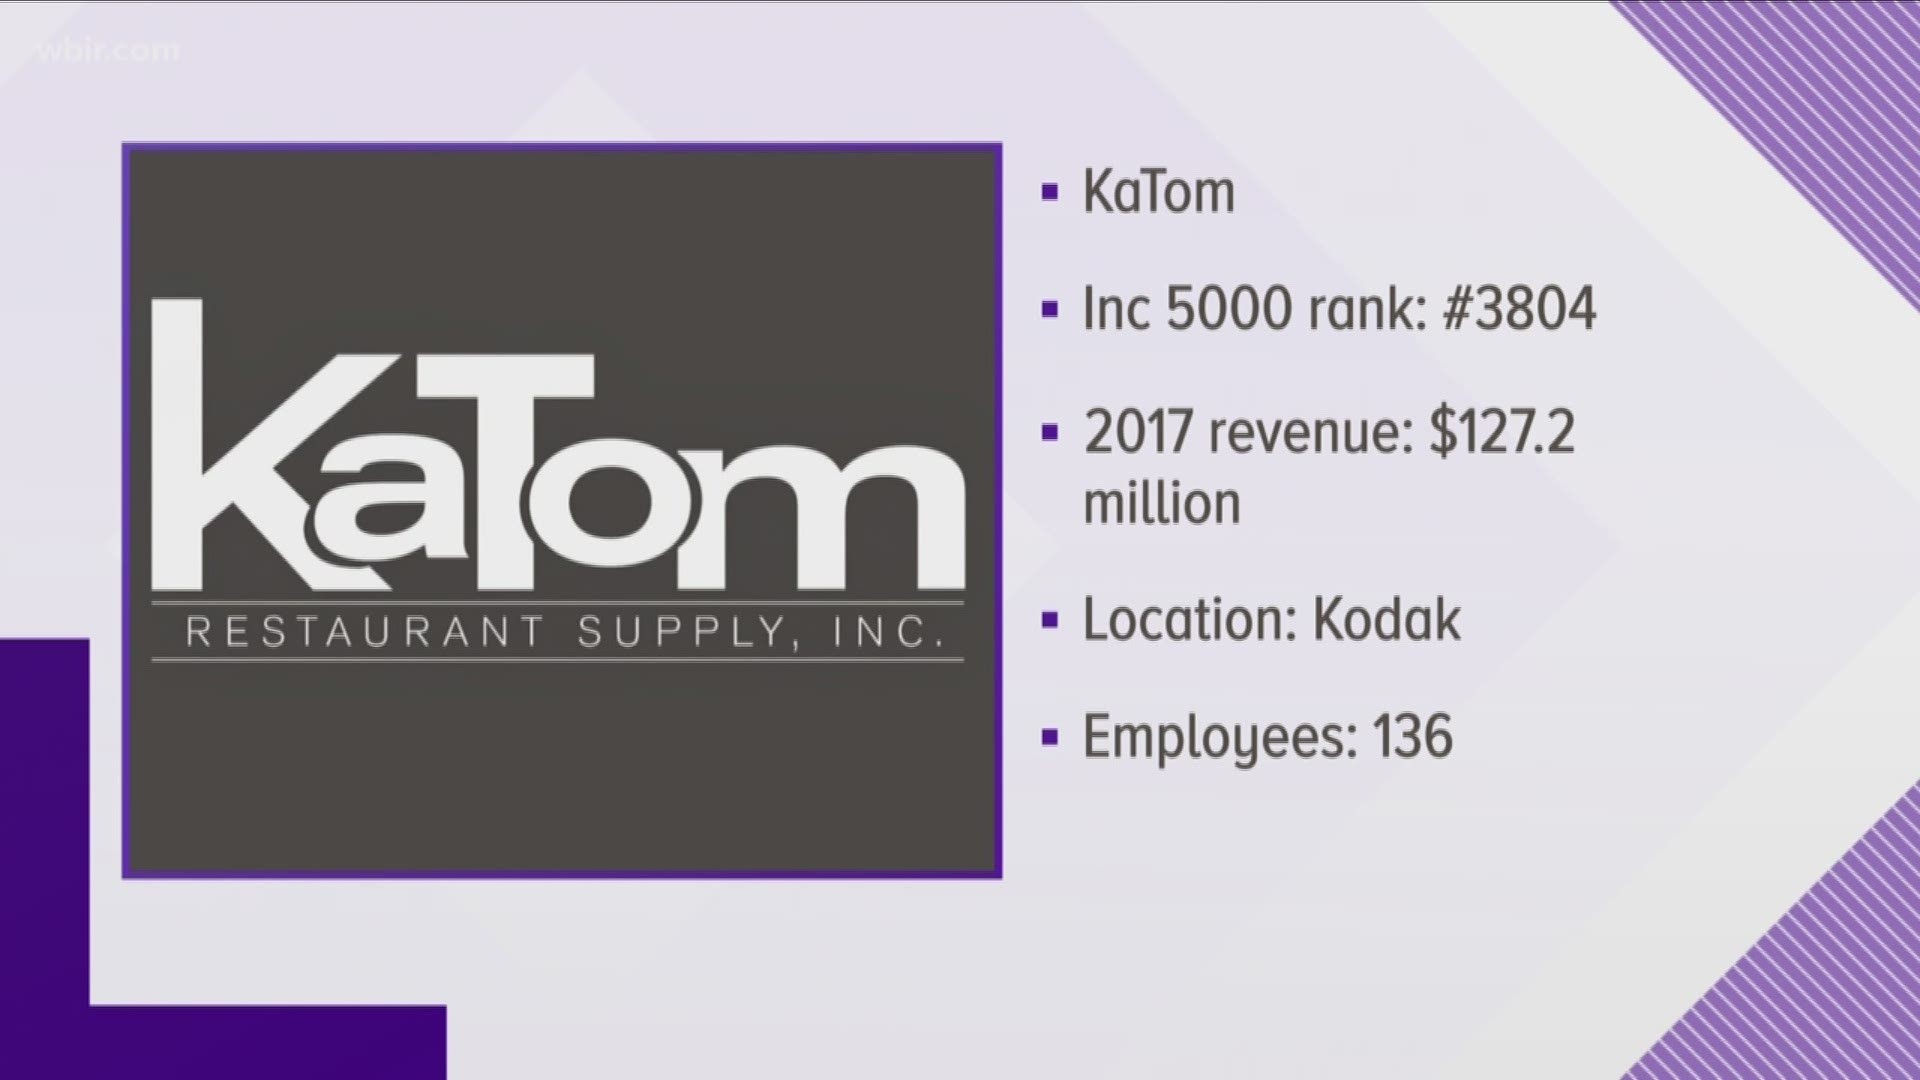 Inc. 5000 is a measure of the best, quickest growing startup companies in the world. CEO Patricia Bible leads KaTom Restaurant Supply. For her, the recognition just keeps coming.